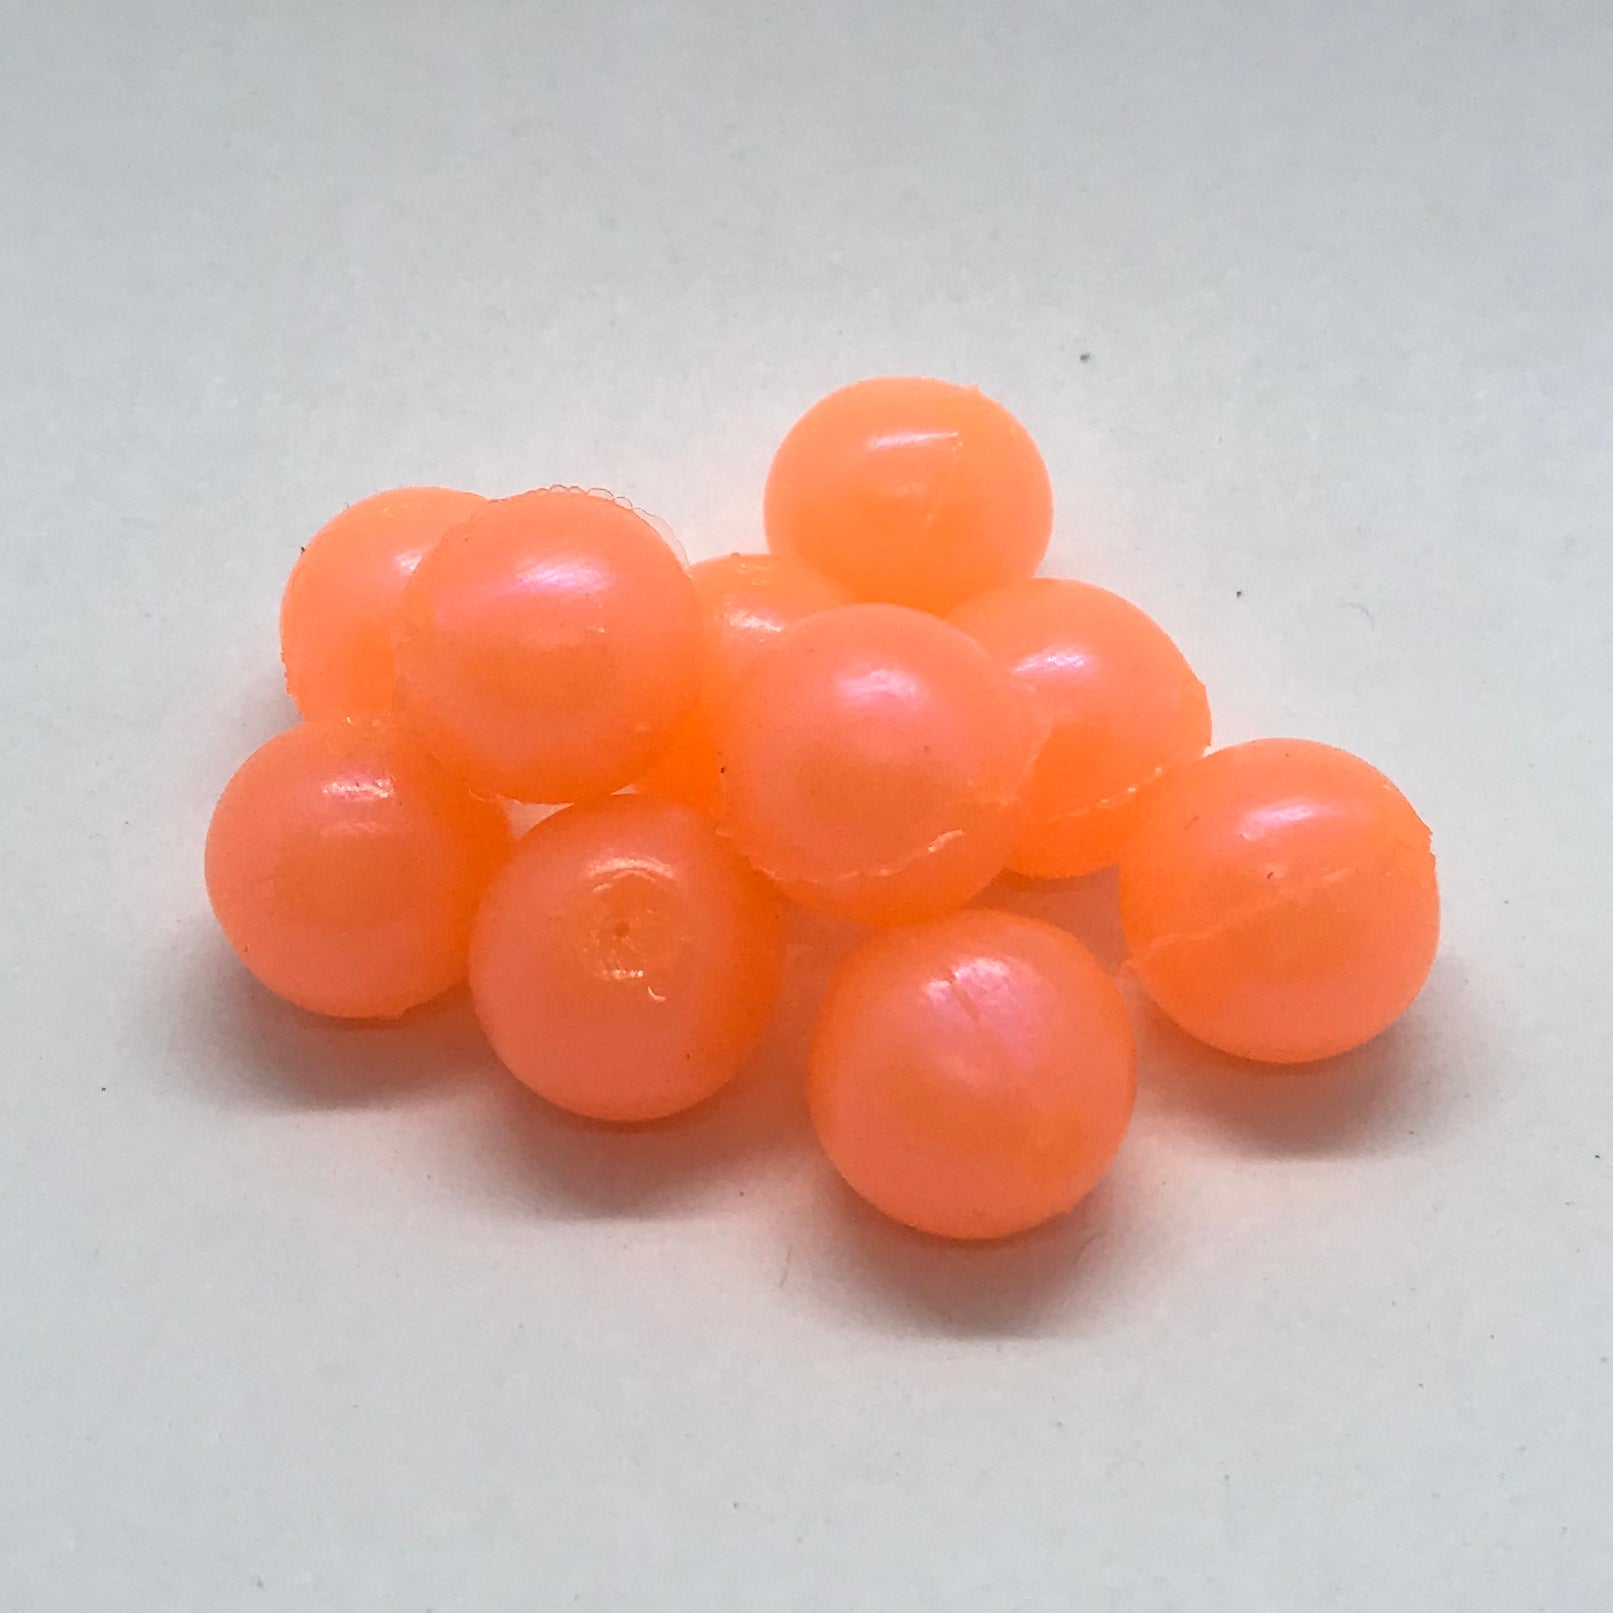 BnR Tackle Soft Beads - 16 mm - Sweet Pink Cherry